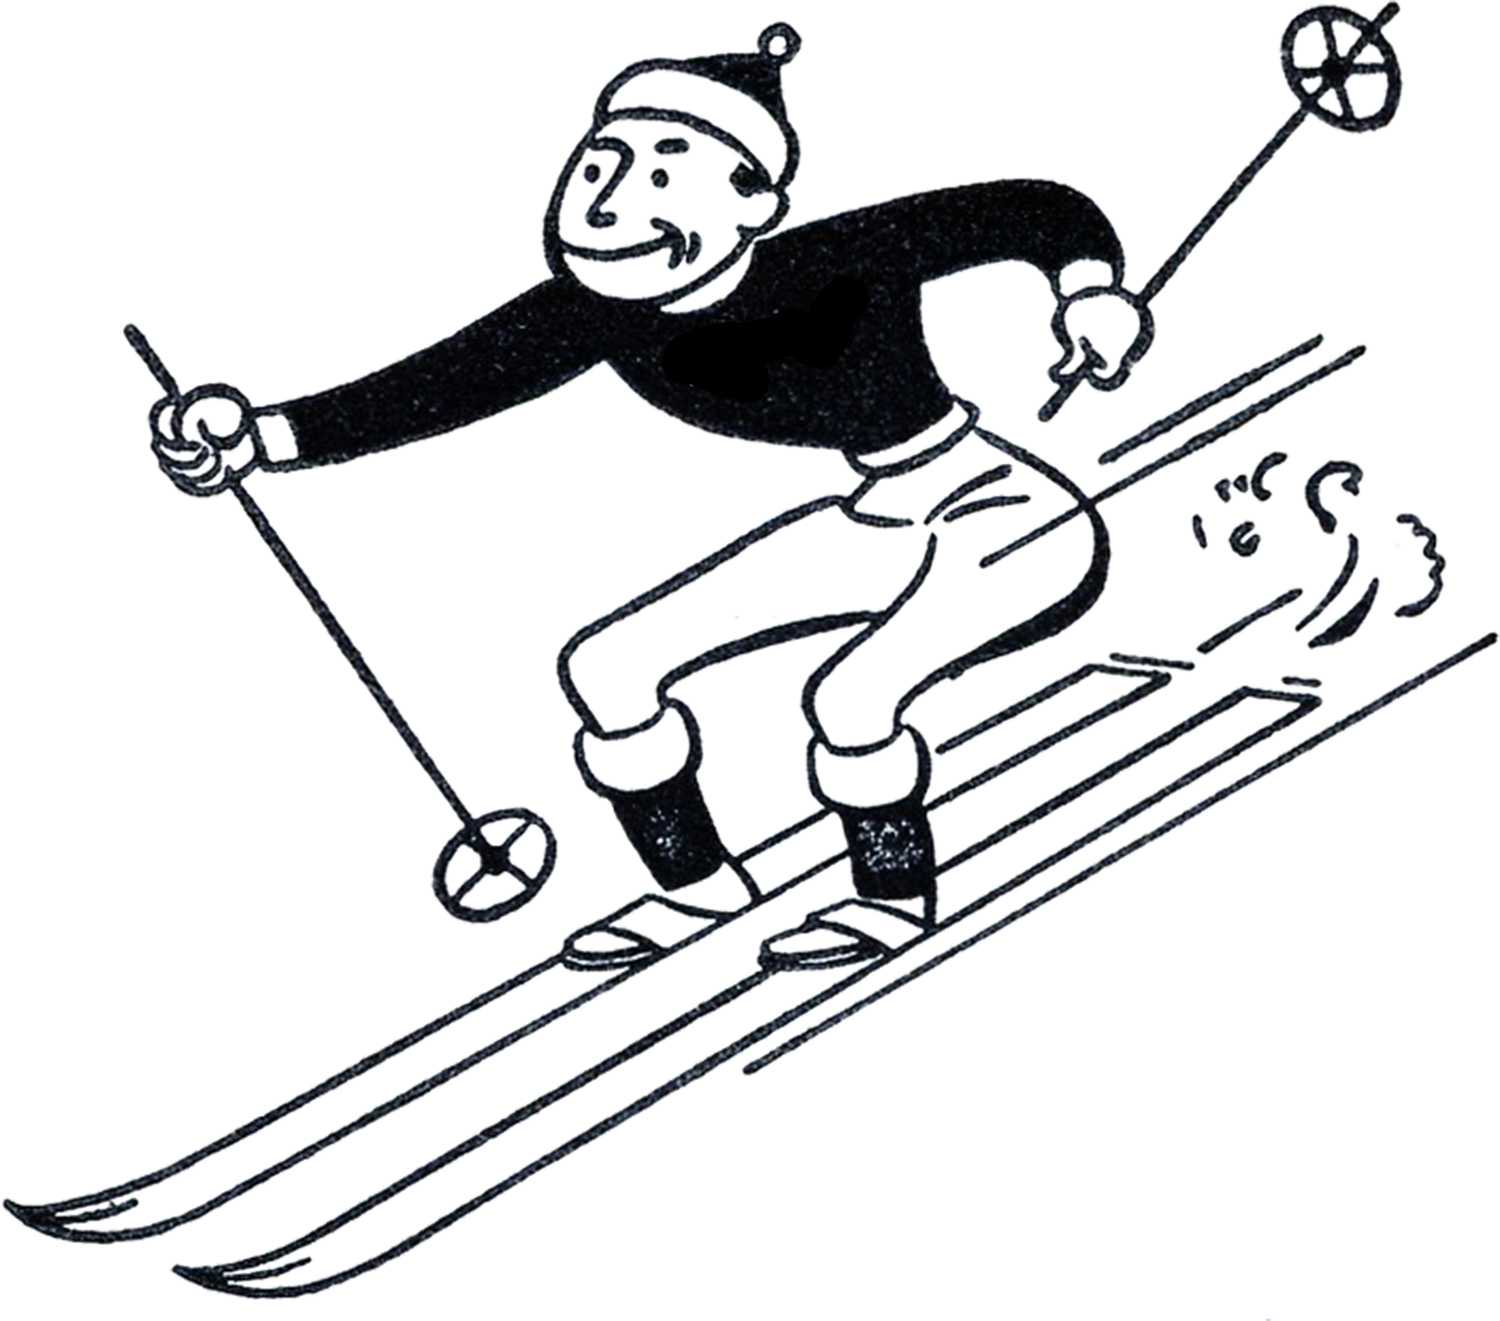 Free Images Skiing, Download Free Clip Art, Free Clip Art on